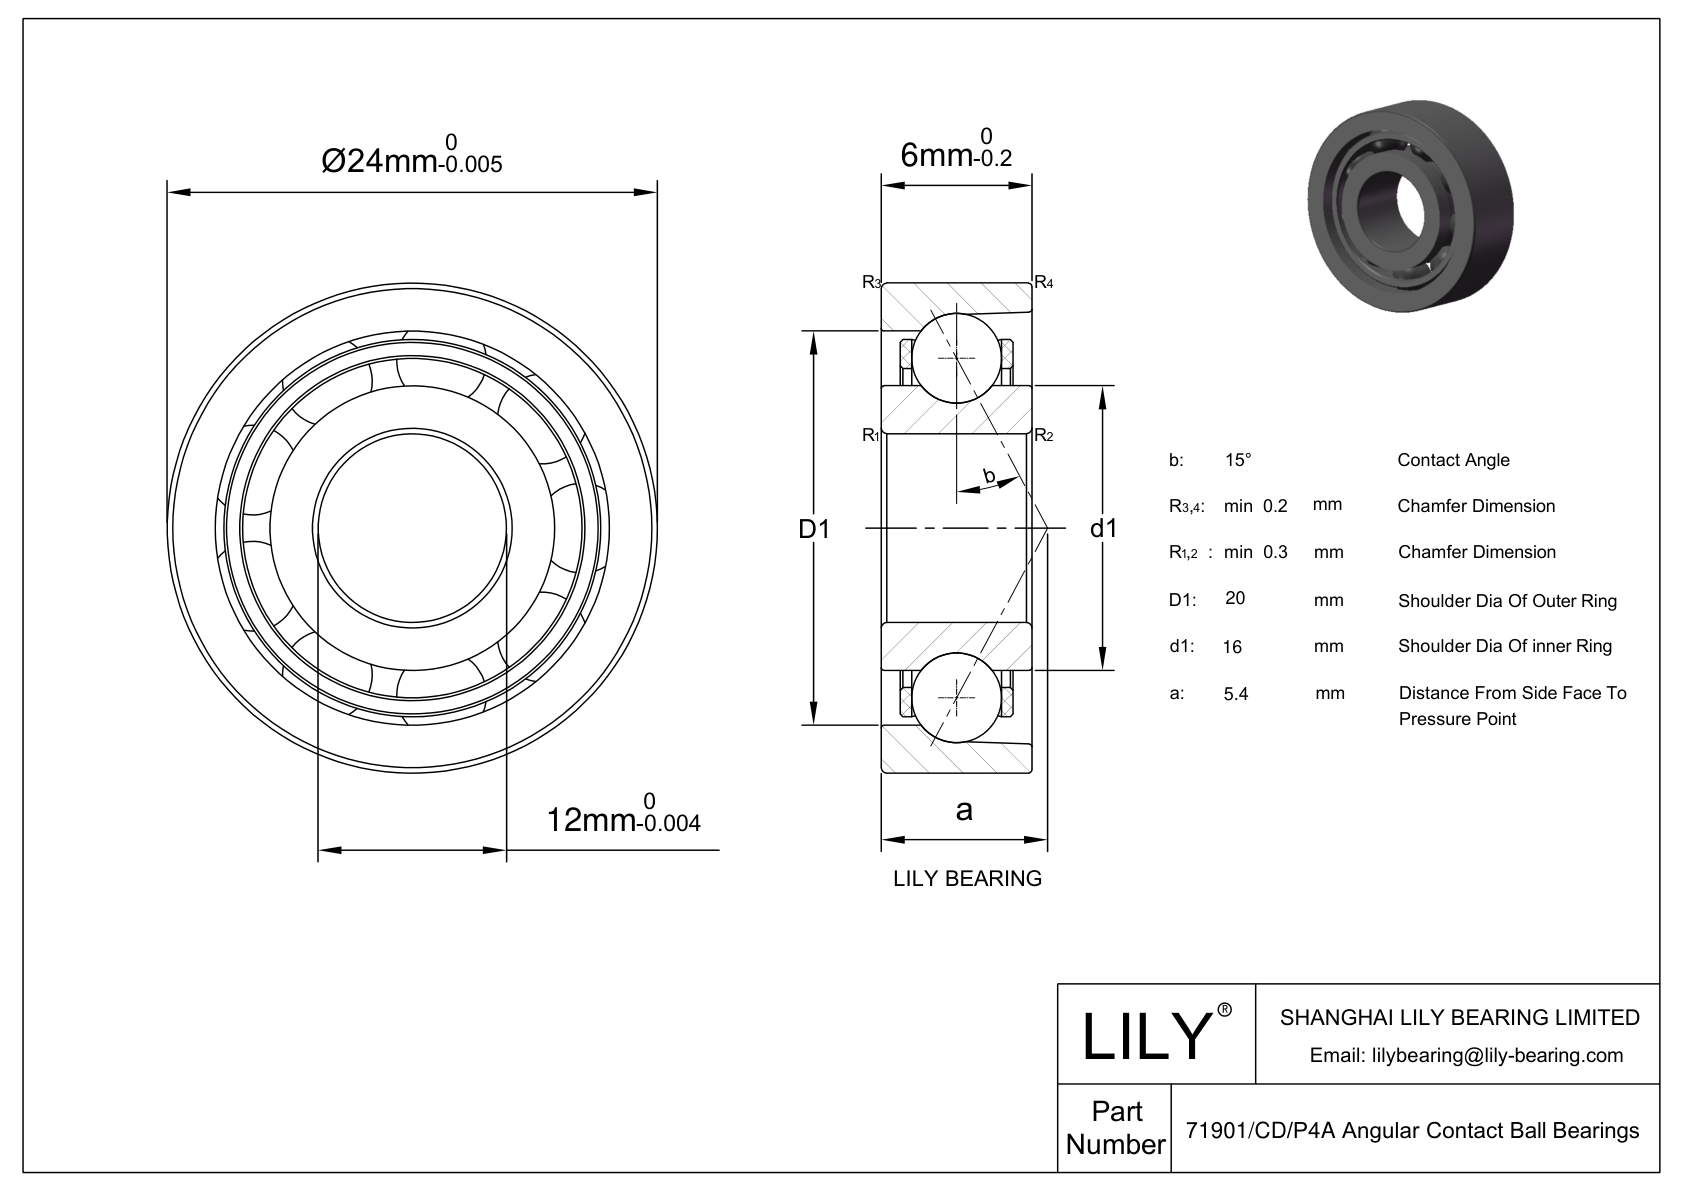 HSS71901-C-T-P4S-UL FAG Super Precision Angular Contact Spindle Bearing cad drawing